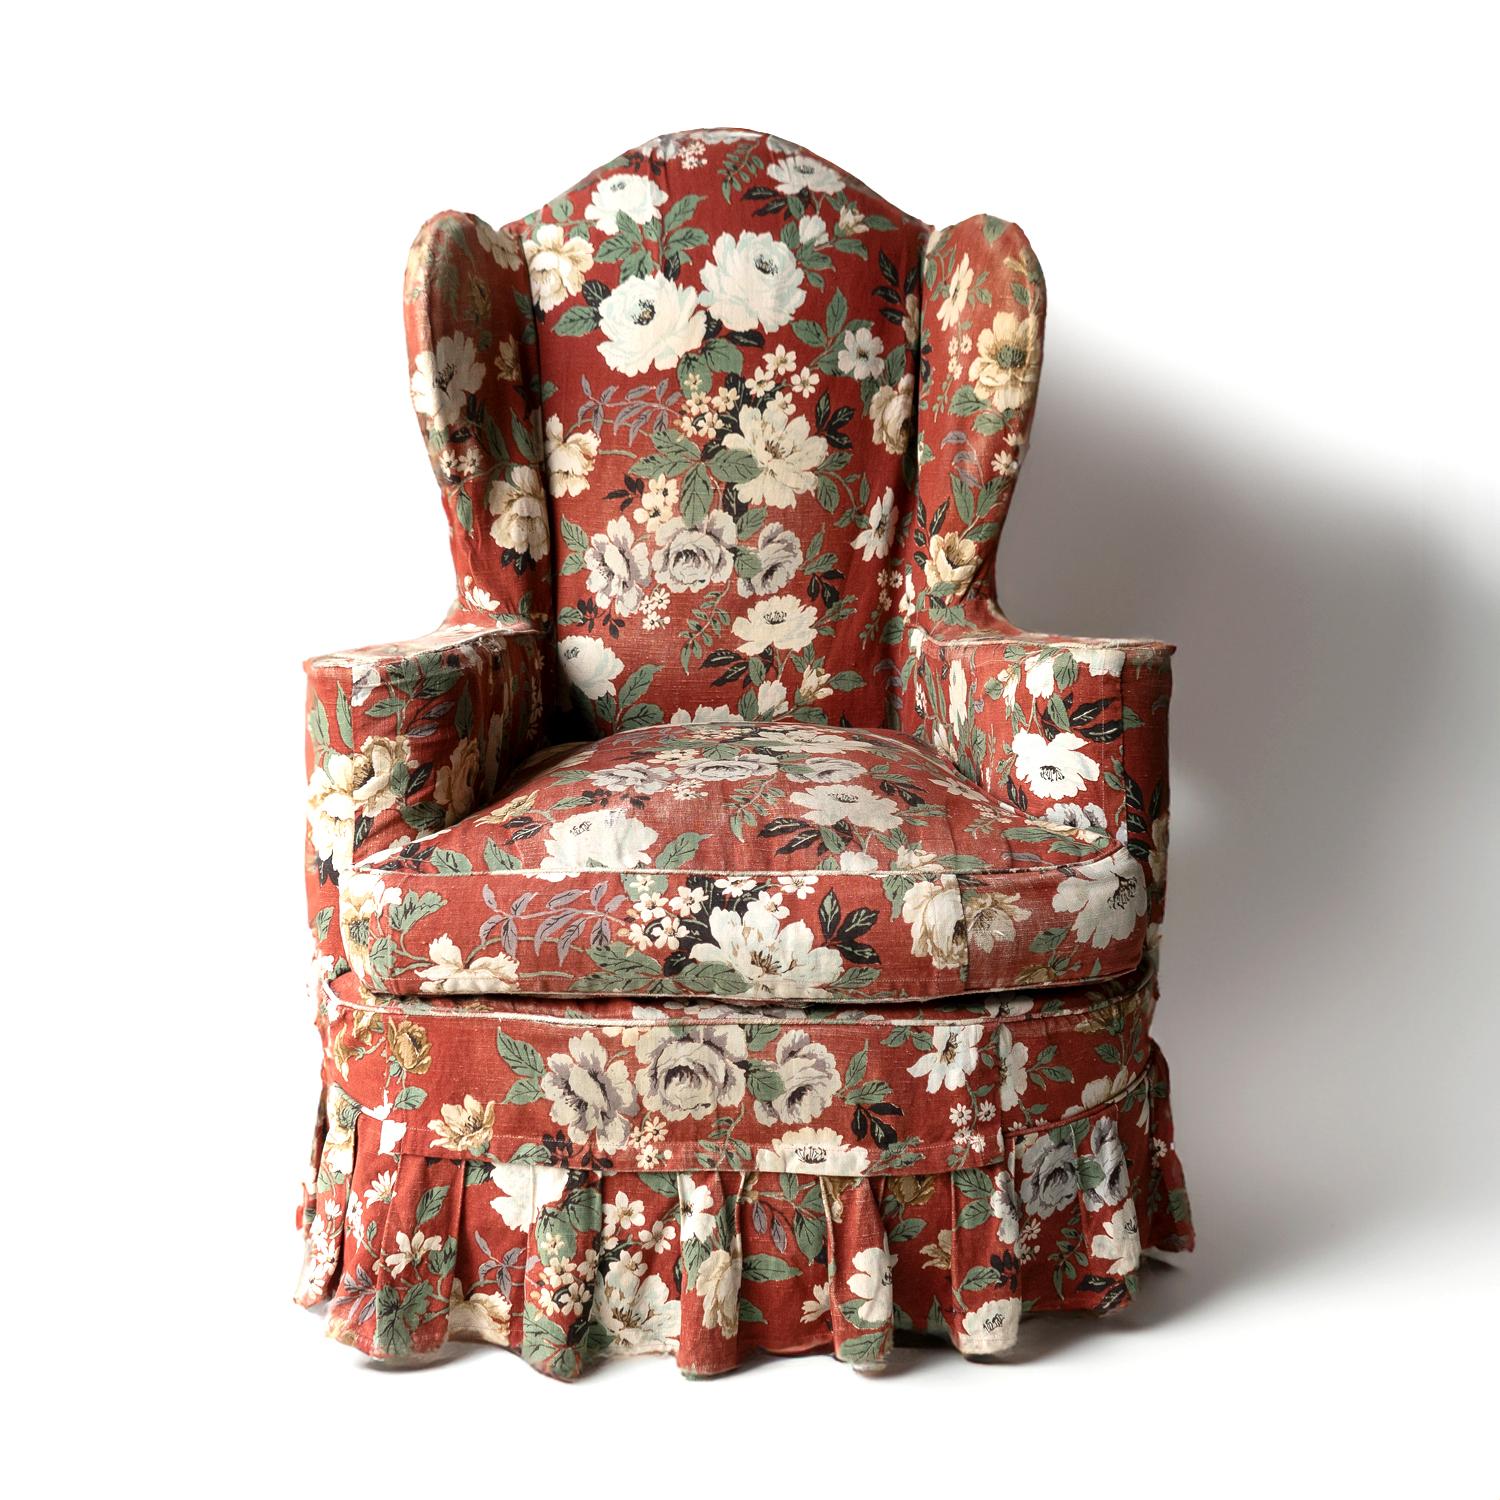 VINTAGE QUEEN ANNE STYLE UPHOLSTERED WING CHAIR 
Loose burnt red cover with white rose and jasmine flowers with stylised greenery foliate designs fitted over the chair with a skirted box pleat. 

Covers a Queen Anne style, heavy and typically